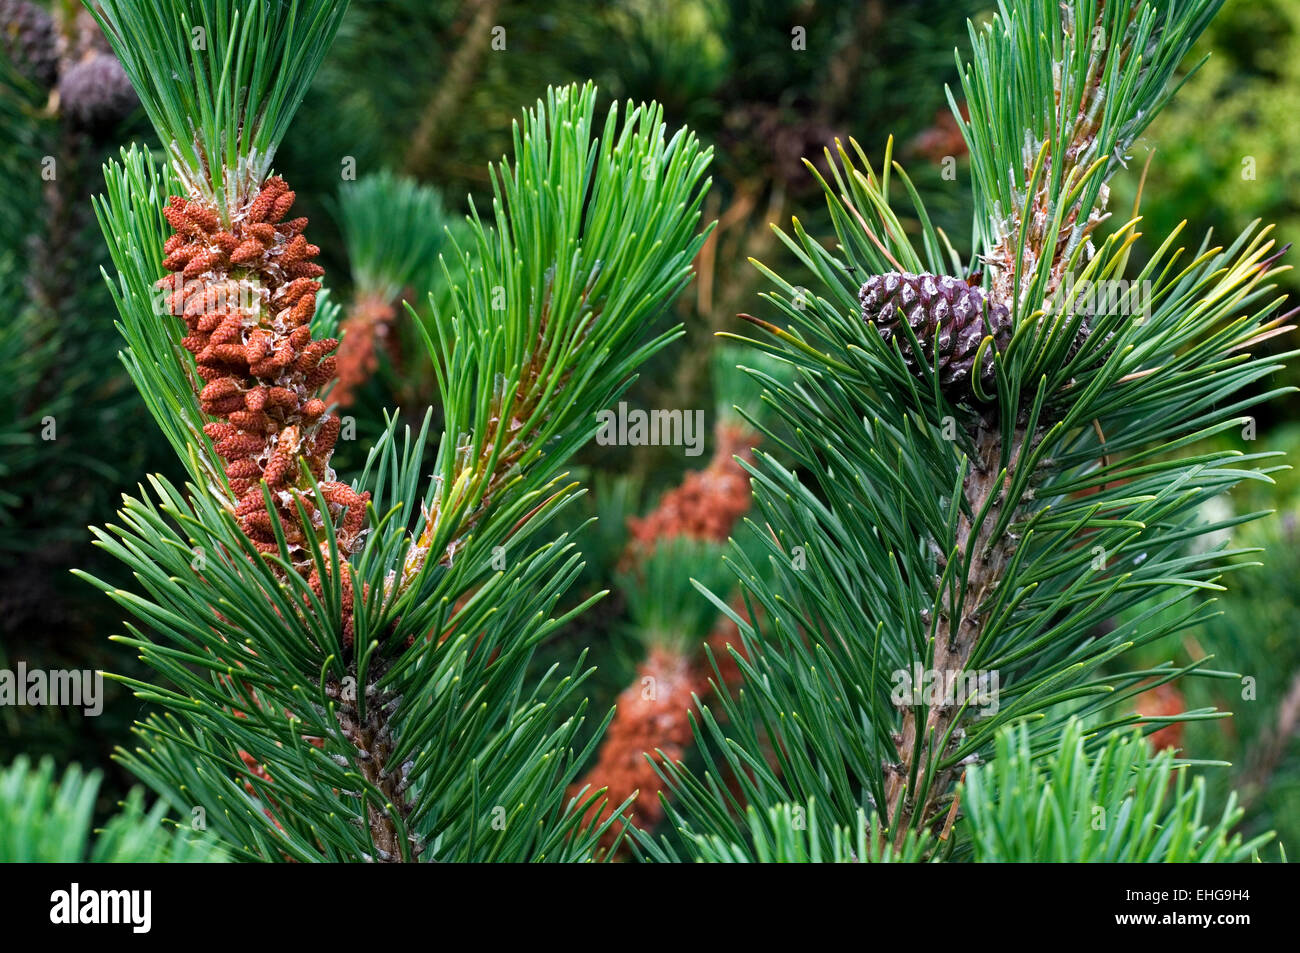 Swiss mountain pine / dwarf mountain pines (Pinus mugo) showing male flowers and developing cones, Switserland, The Alps Stock Photo